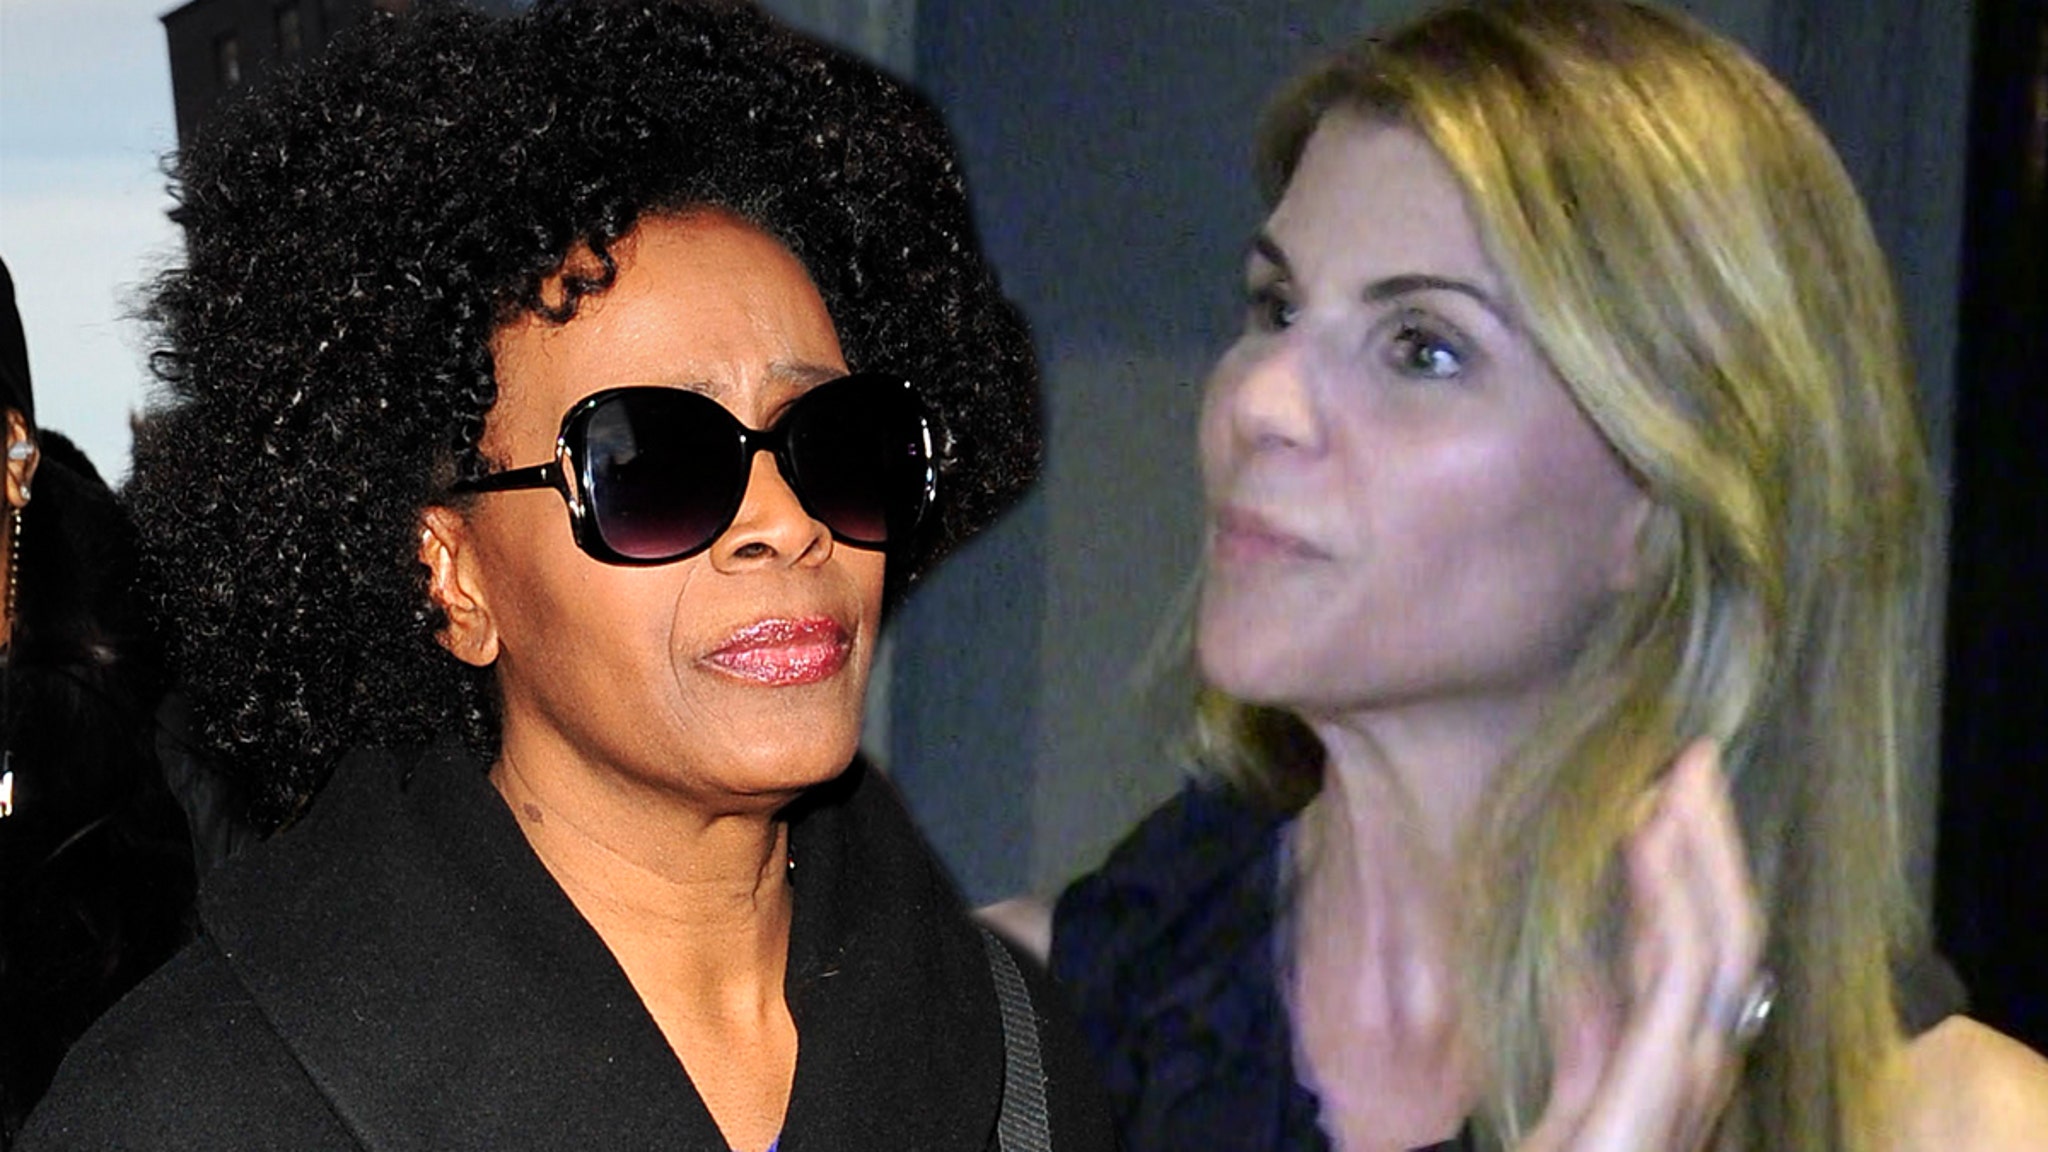 ‘Fresh Prince’ star Janet Hubert hits Lori Loughlin after being released from prison